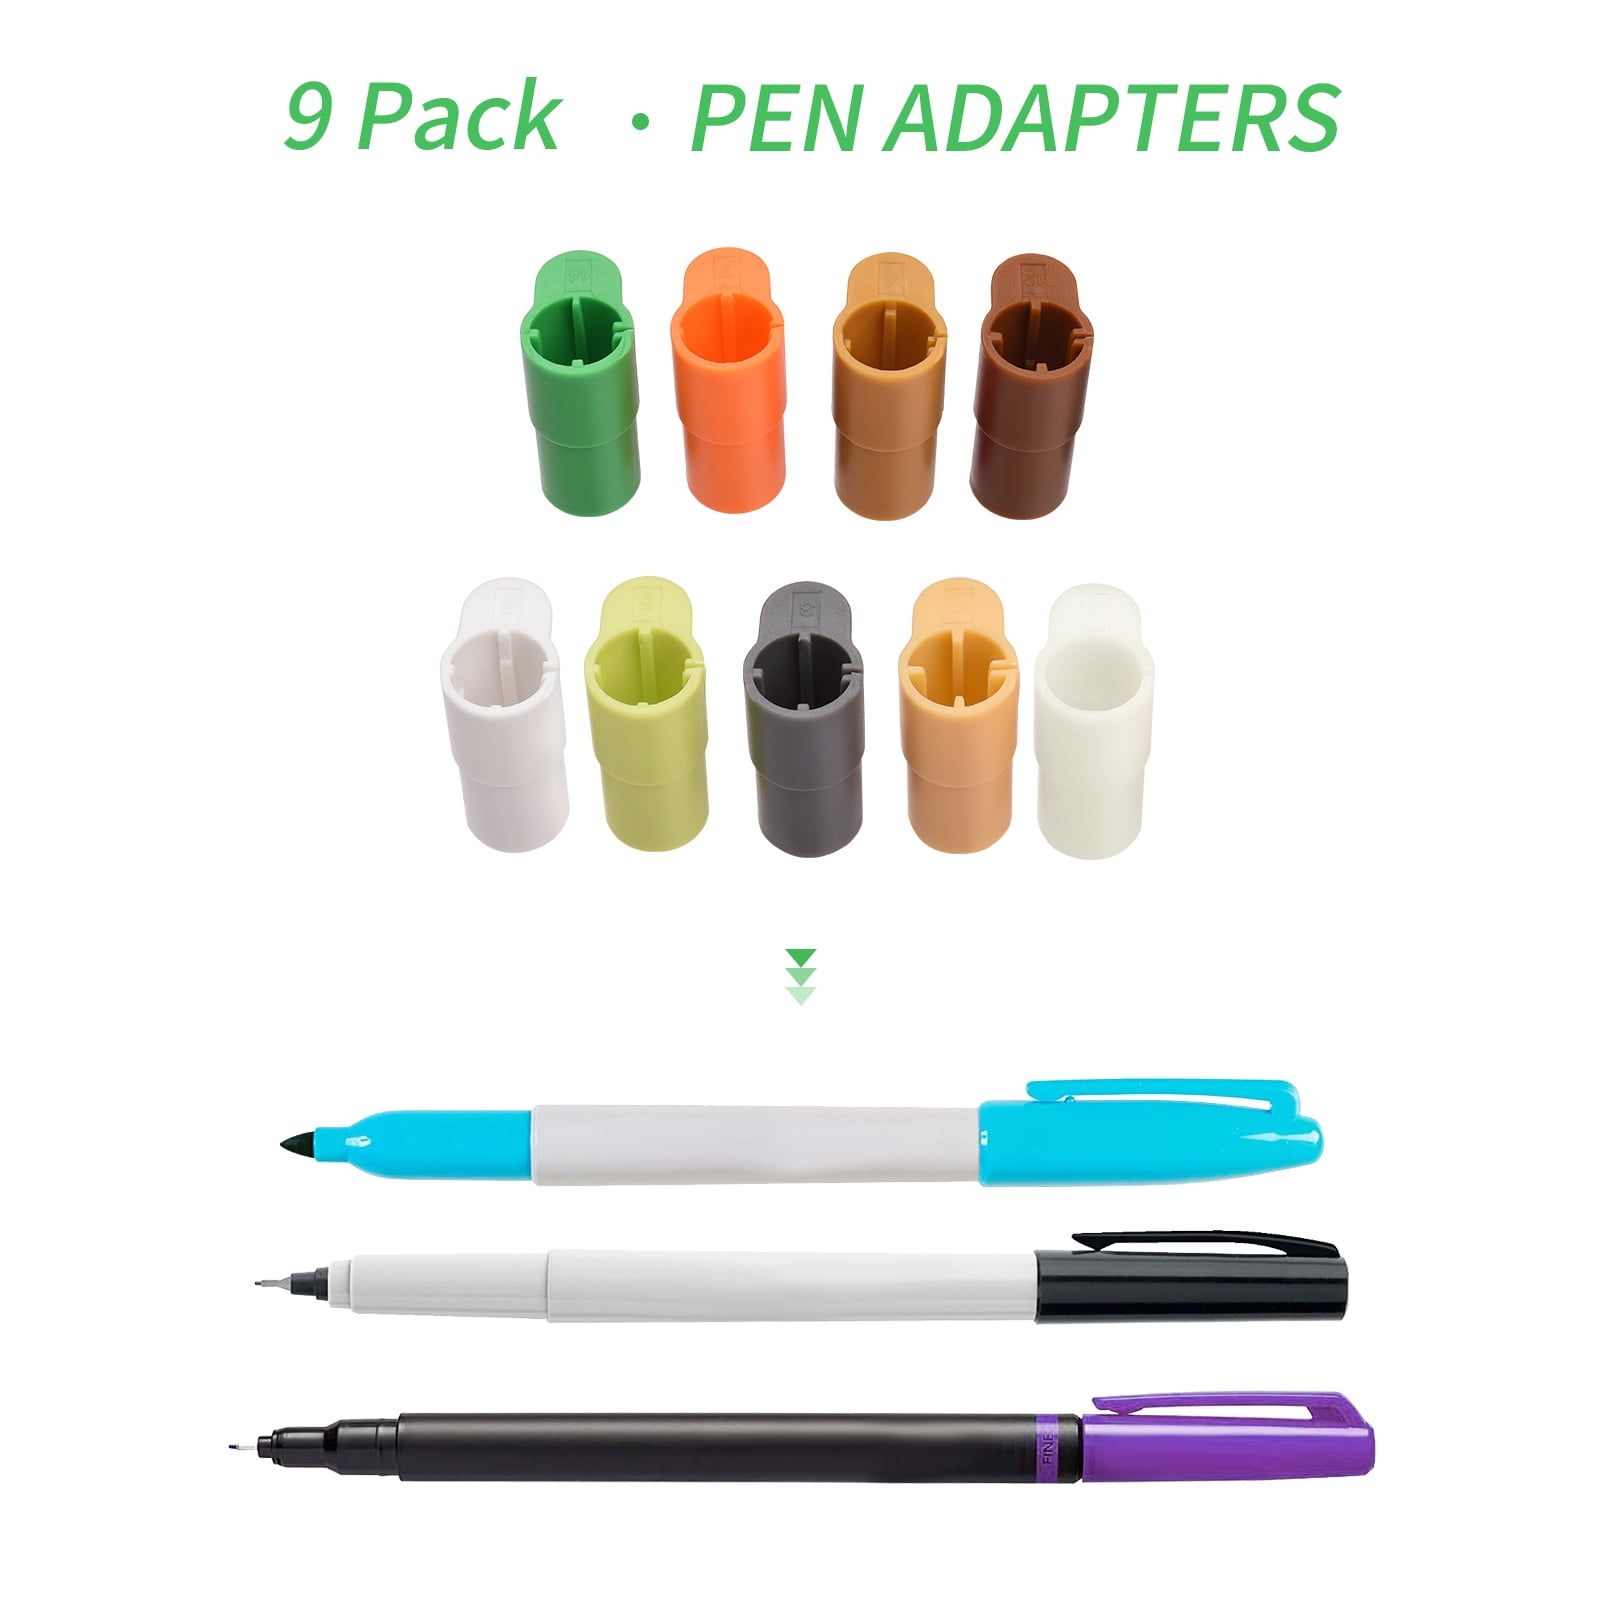 E/T Pen Adapter Holder Set|Accessories Compatible With Cricut|No Need For Depth Calibration|Sturdy And Useful|3 Sets Of Pen Adapter. 